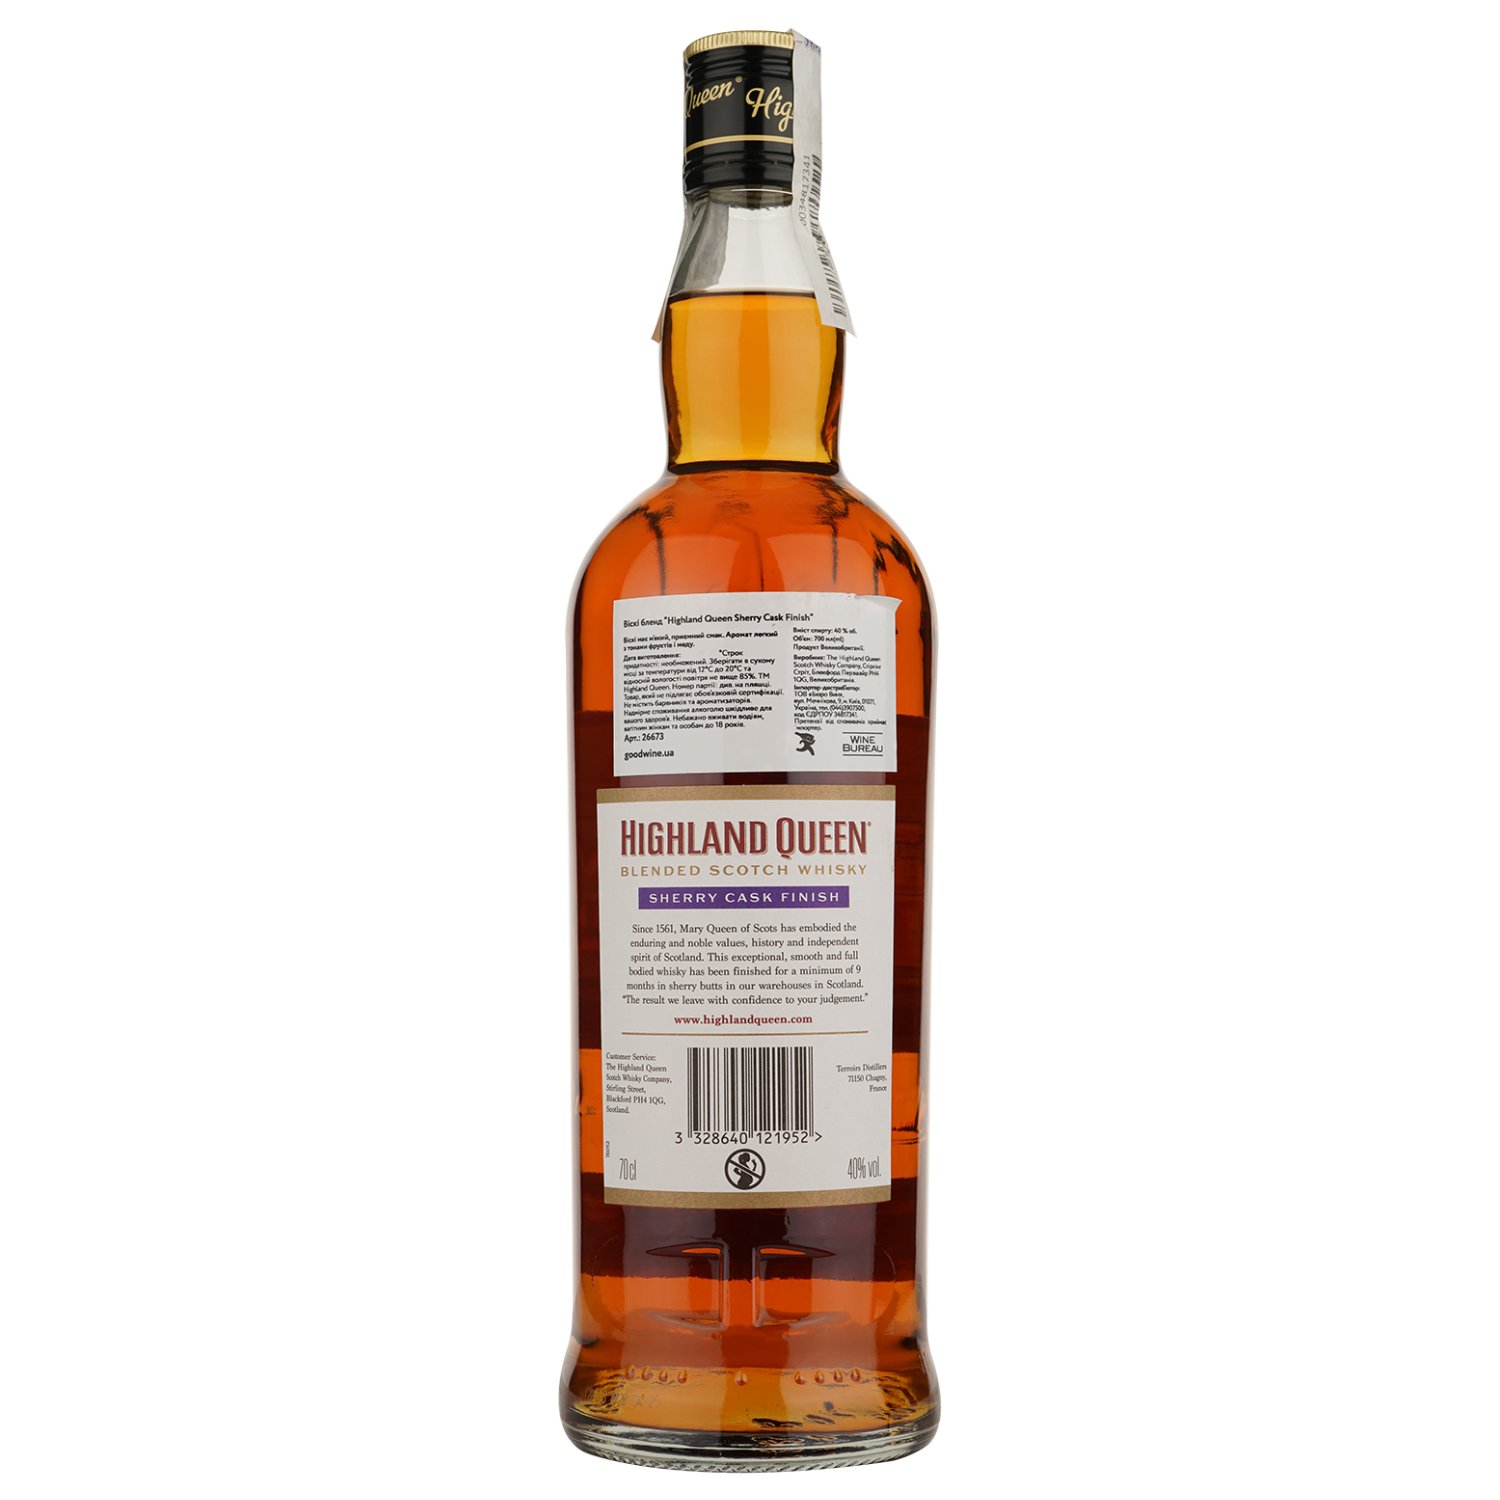 Виски Highland Queen Sherry Cask Finish Blended Scotch Whisky, 40%, 0,7 л - фото 2